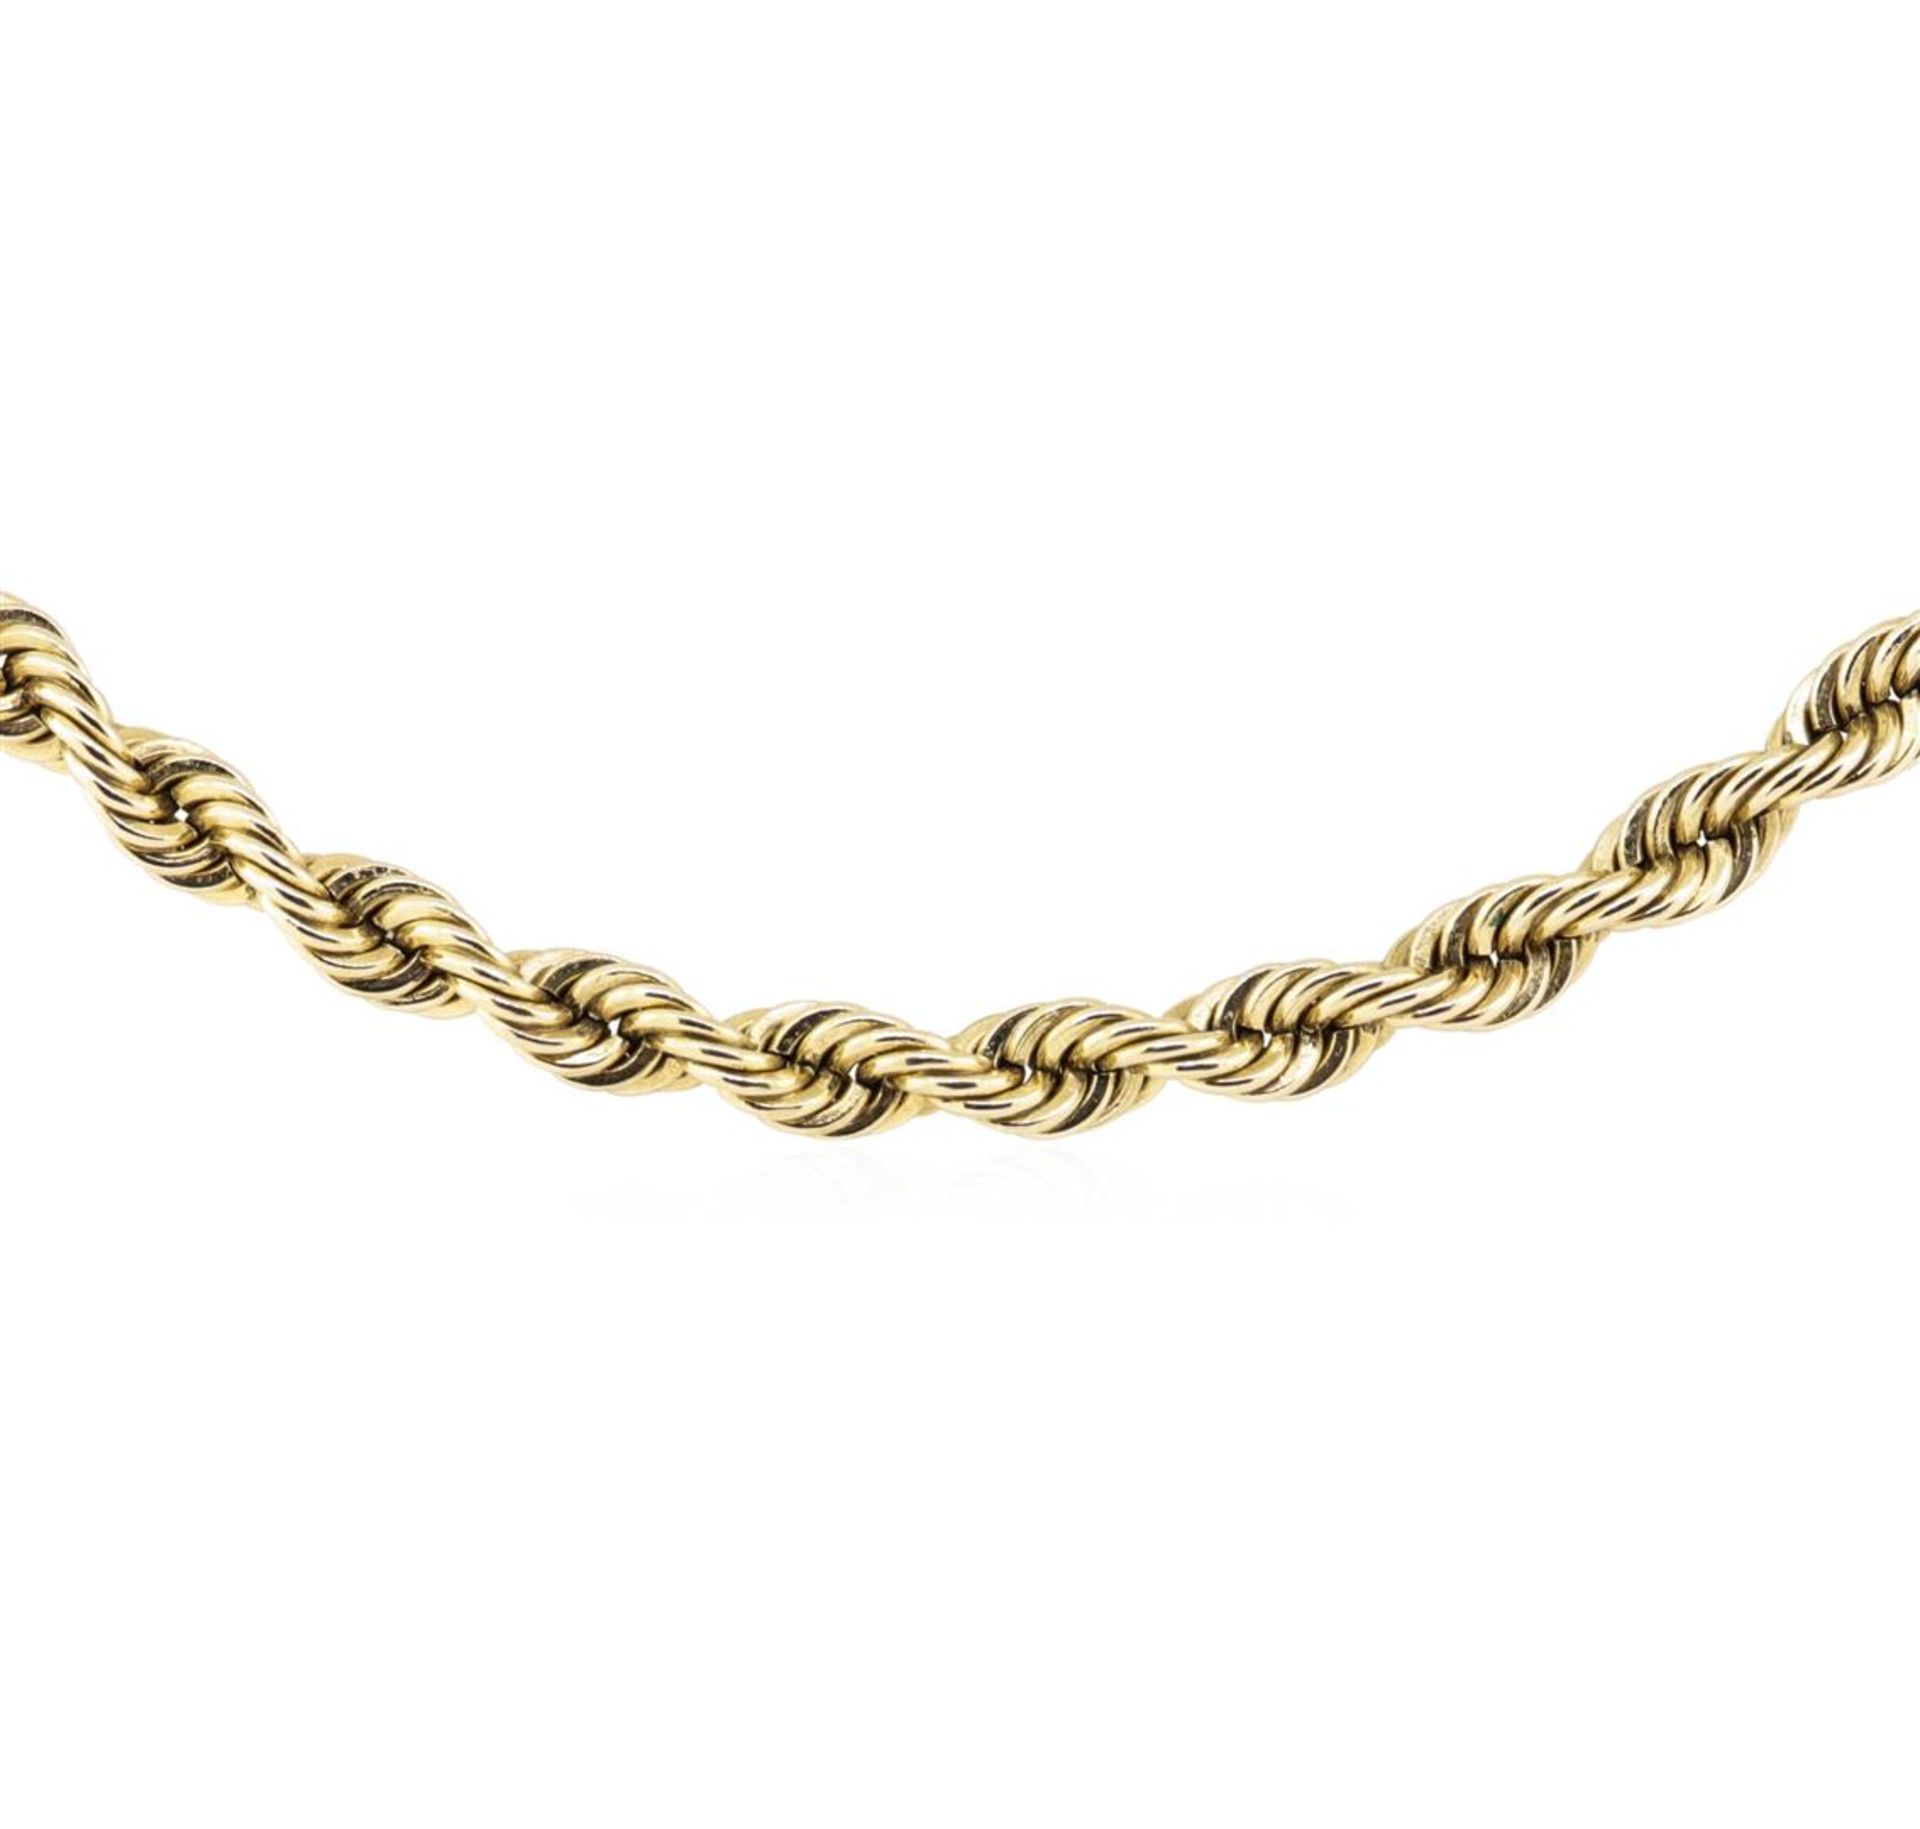 Twenty Four Inch Rope Chain - 14KT Yellow Gold - Image 2 of 2